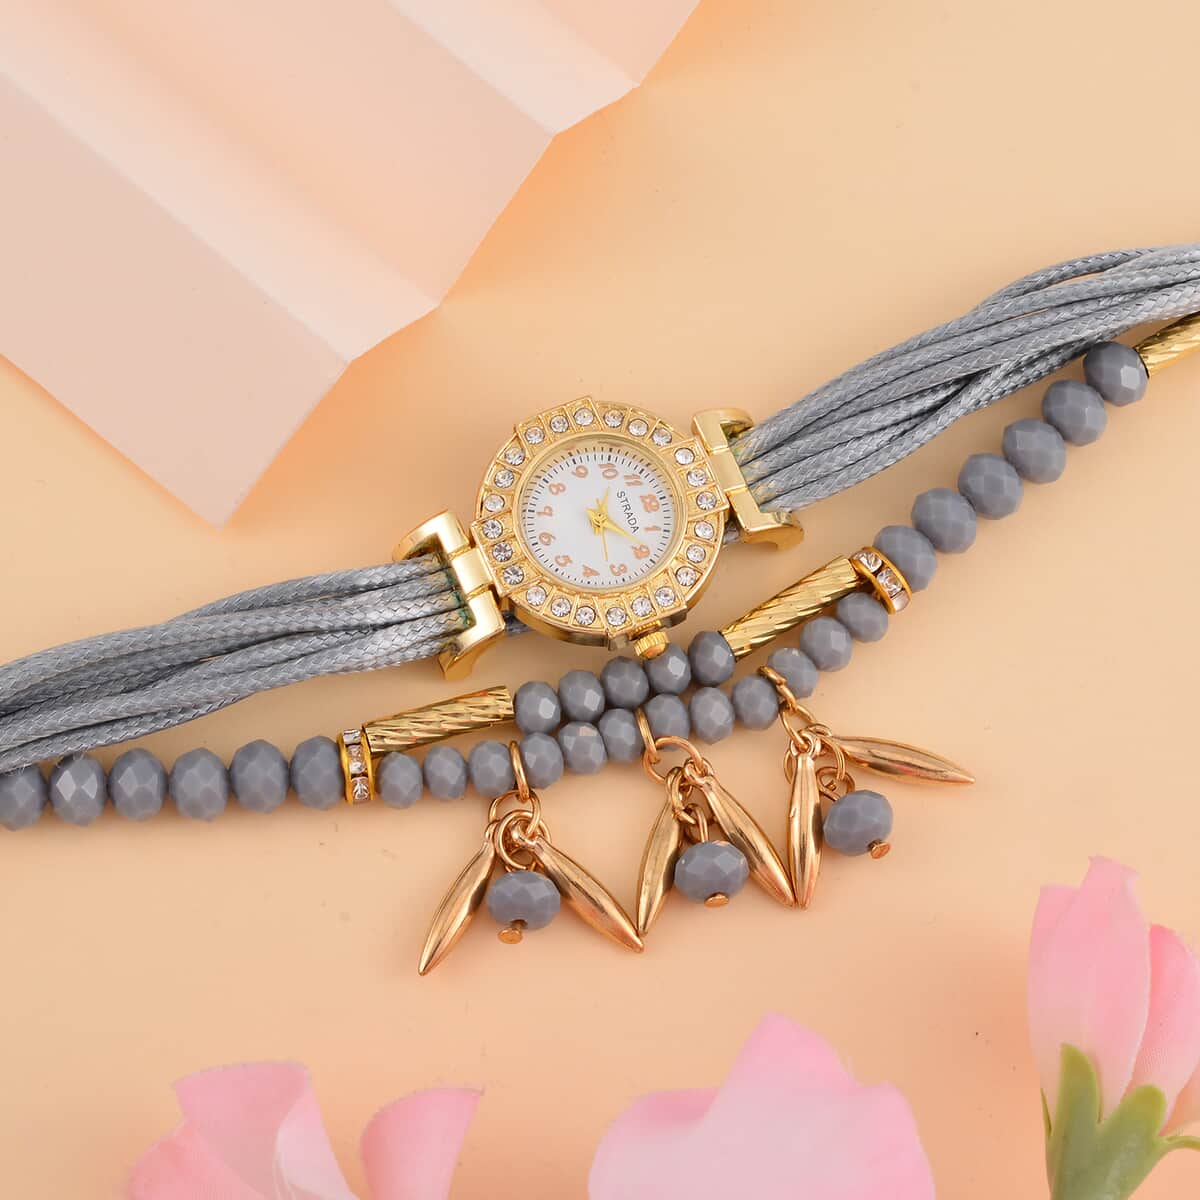 Strada Austrian Crystal, Gray Pearl Glass and Resin Japanese Movement Bracelet Watch in Goldtone with Gray Nylon Strap (25.4 mm) (8.00-9.00 Inches) image number 1